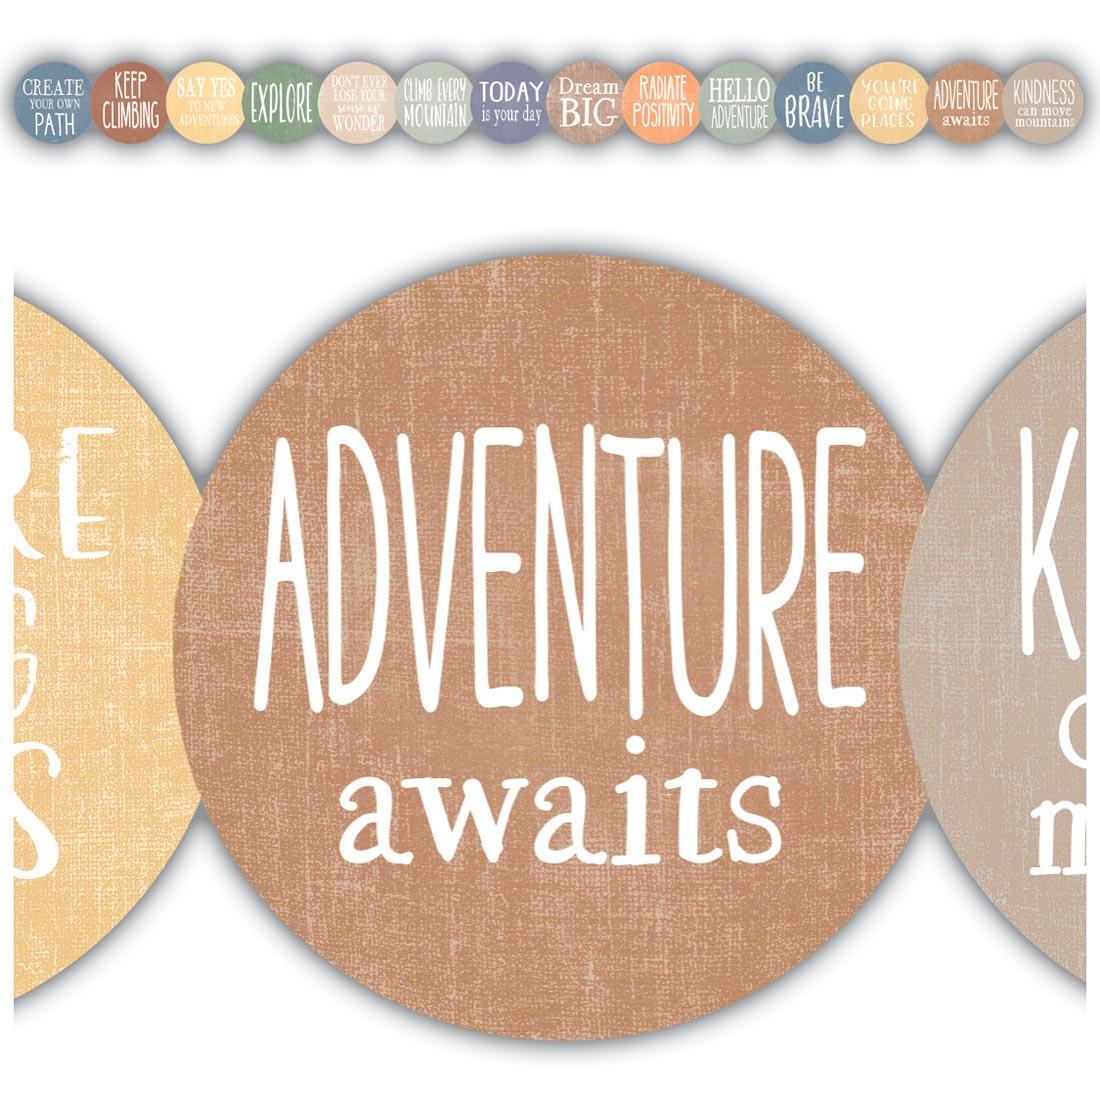 Full view and closeup of the Positive Sayings Die-Cut Border Trim from the Moving Mountains collection by Teacher Created Resources